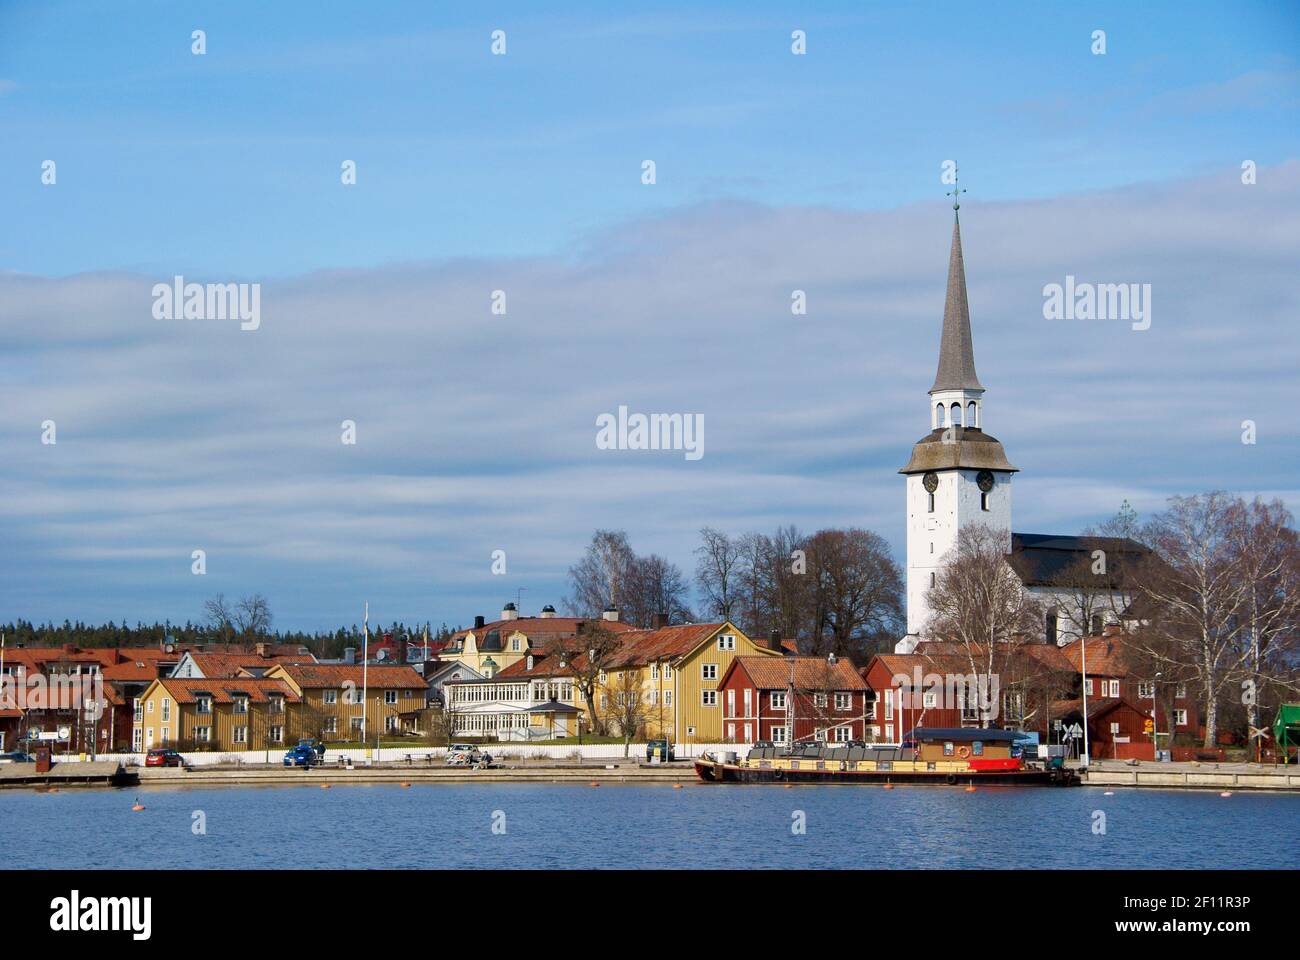 Mariefred, Sweden. View from lake Mälaren. Stock Photo